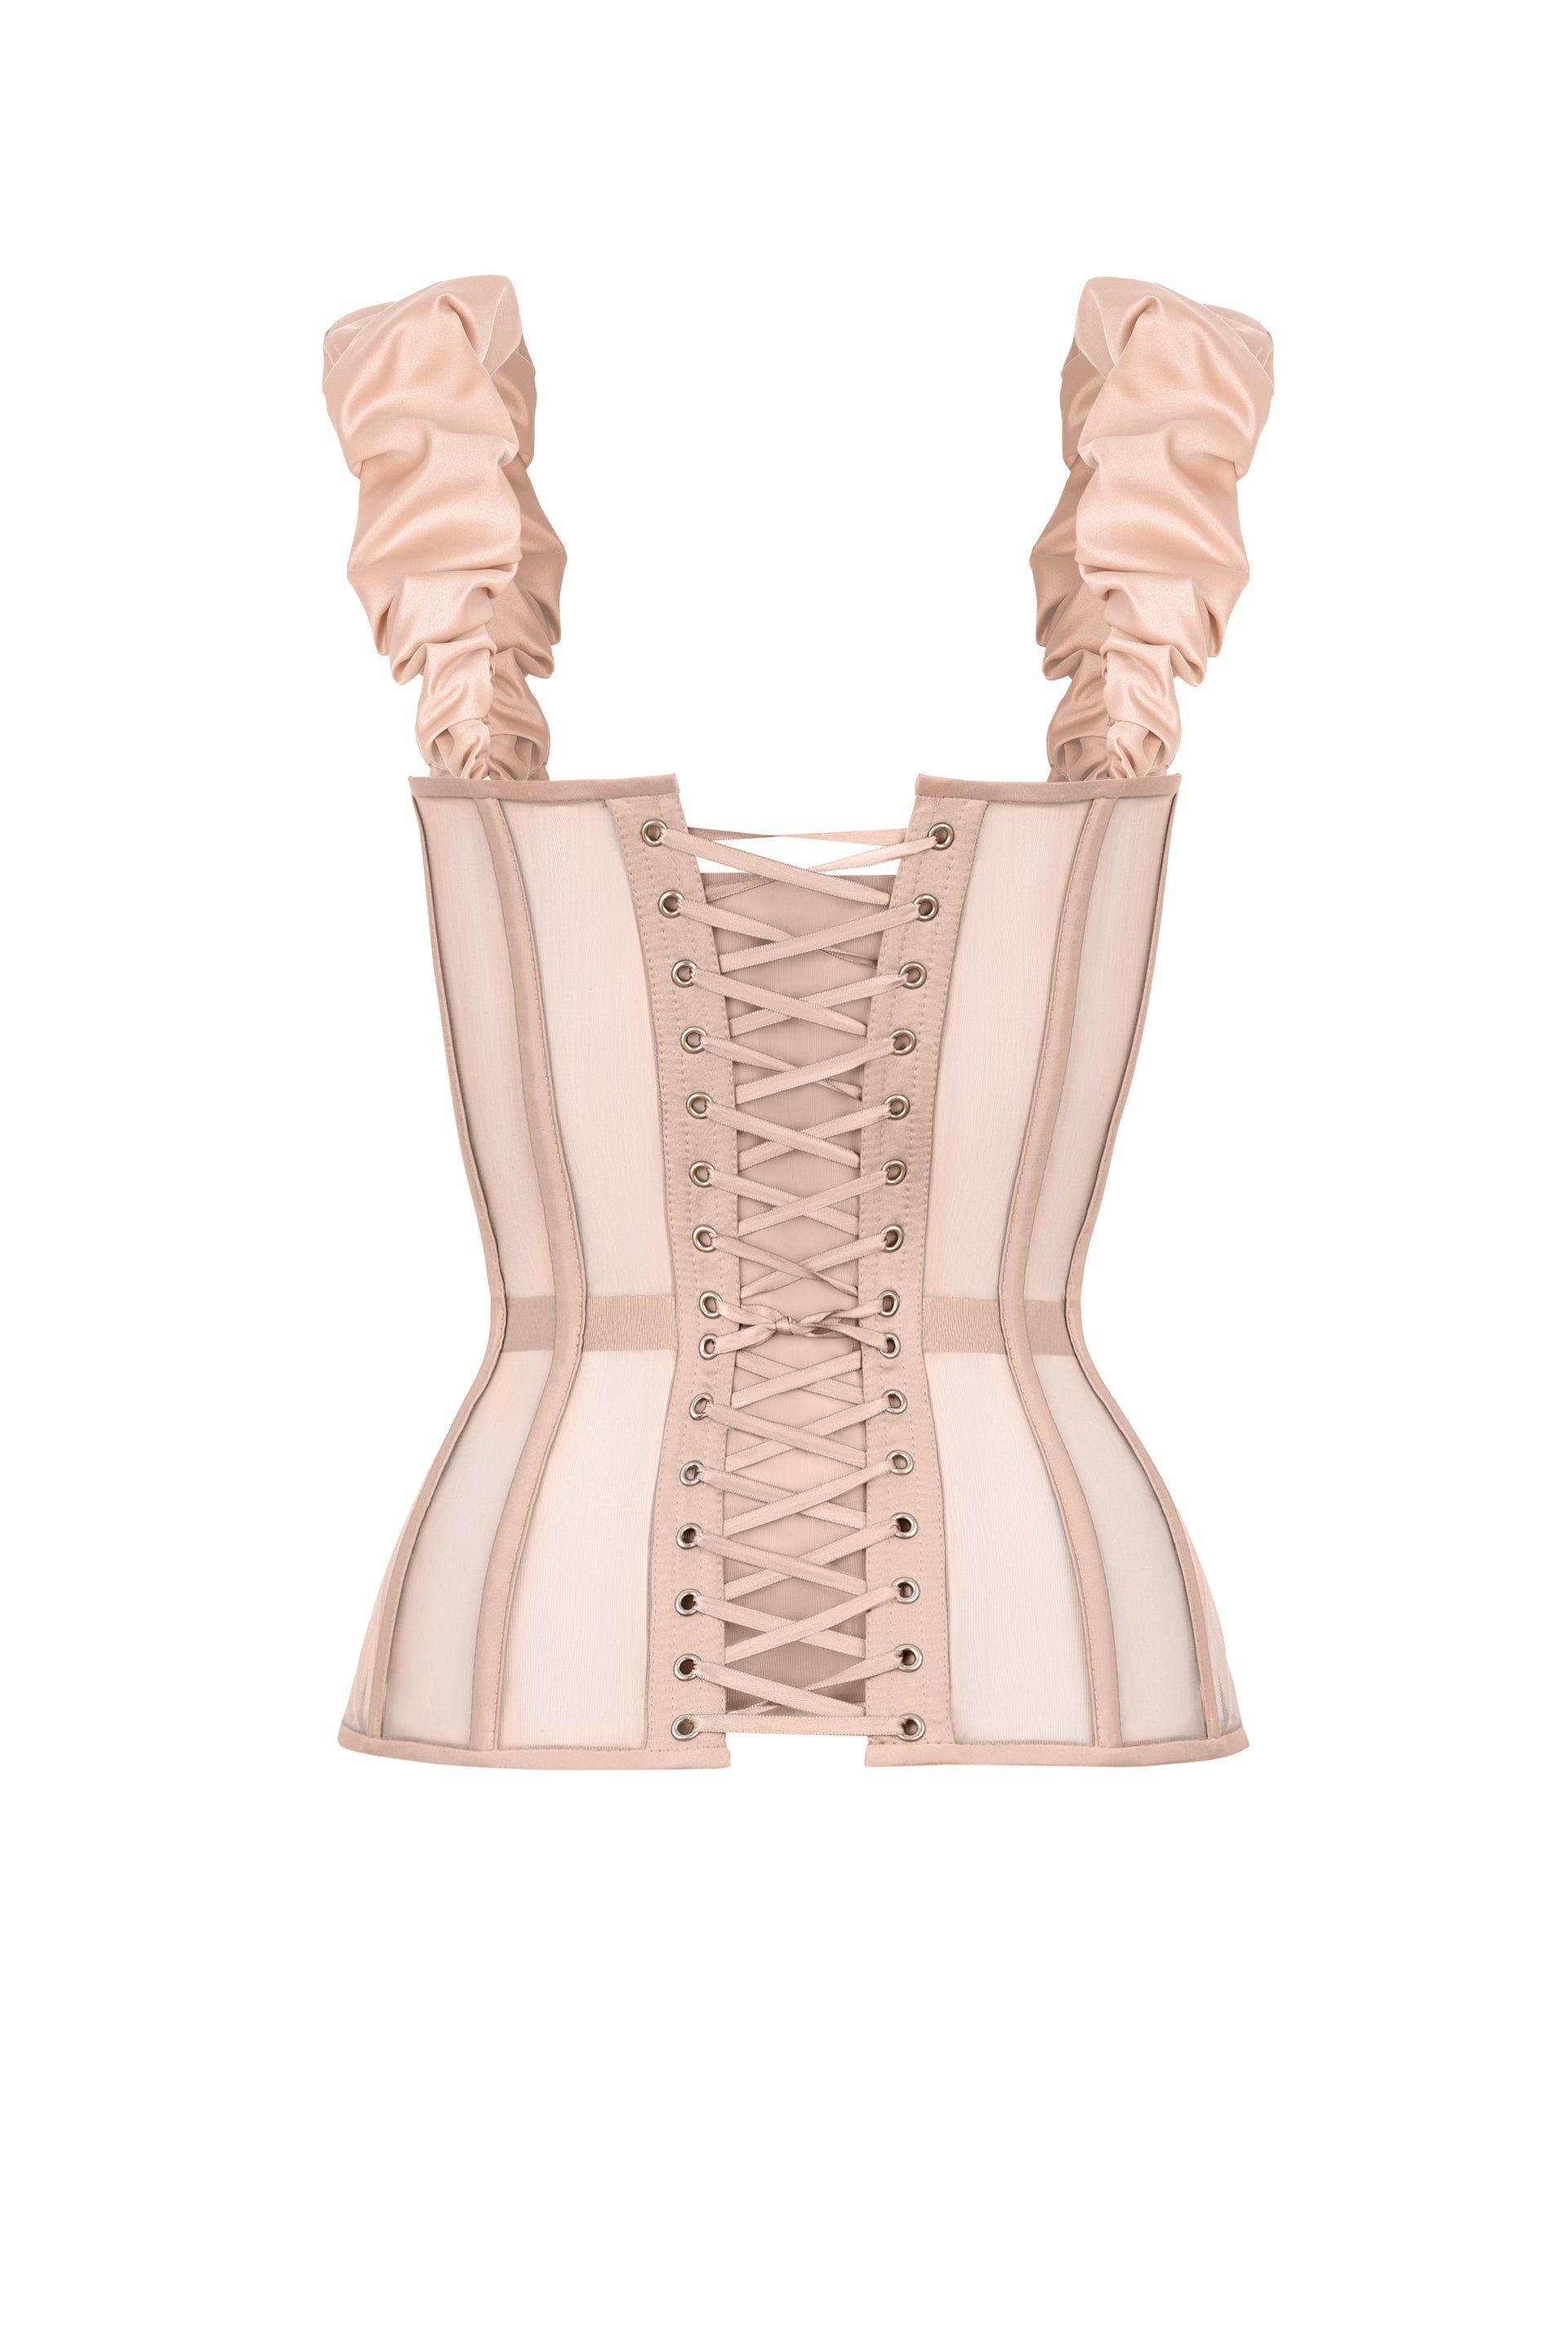 Beige satin corset with transparent back and detachable sleeves